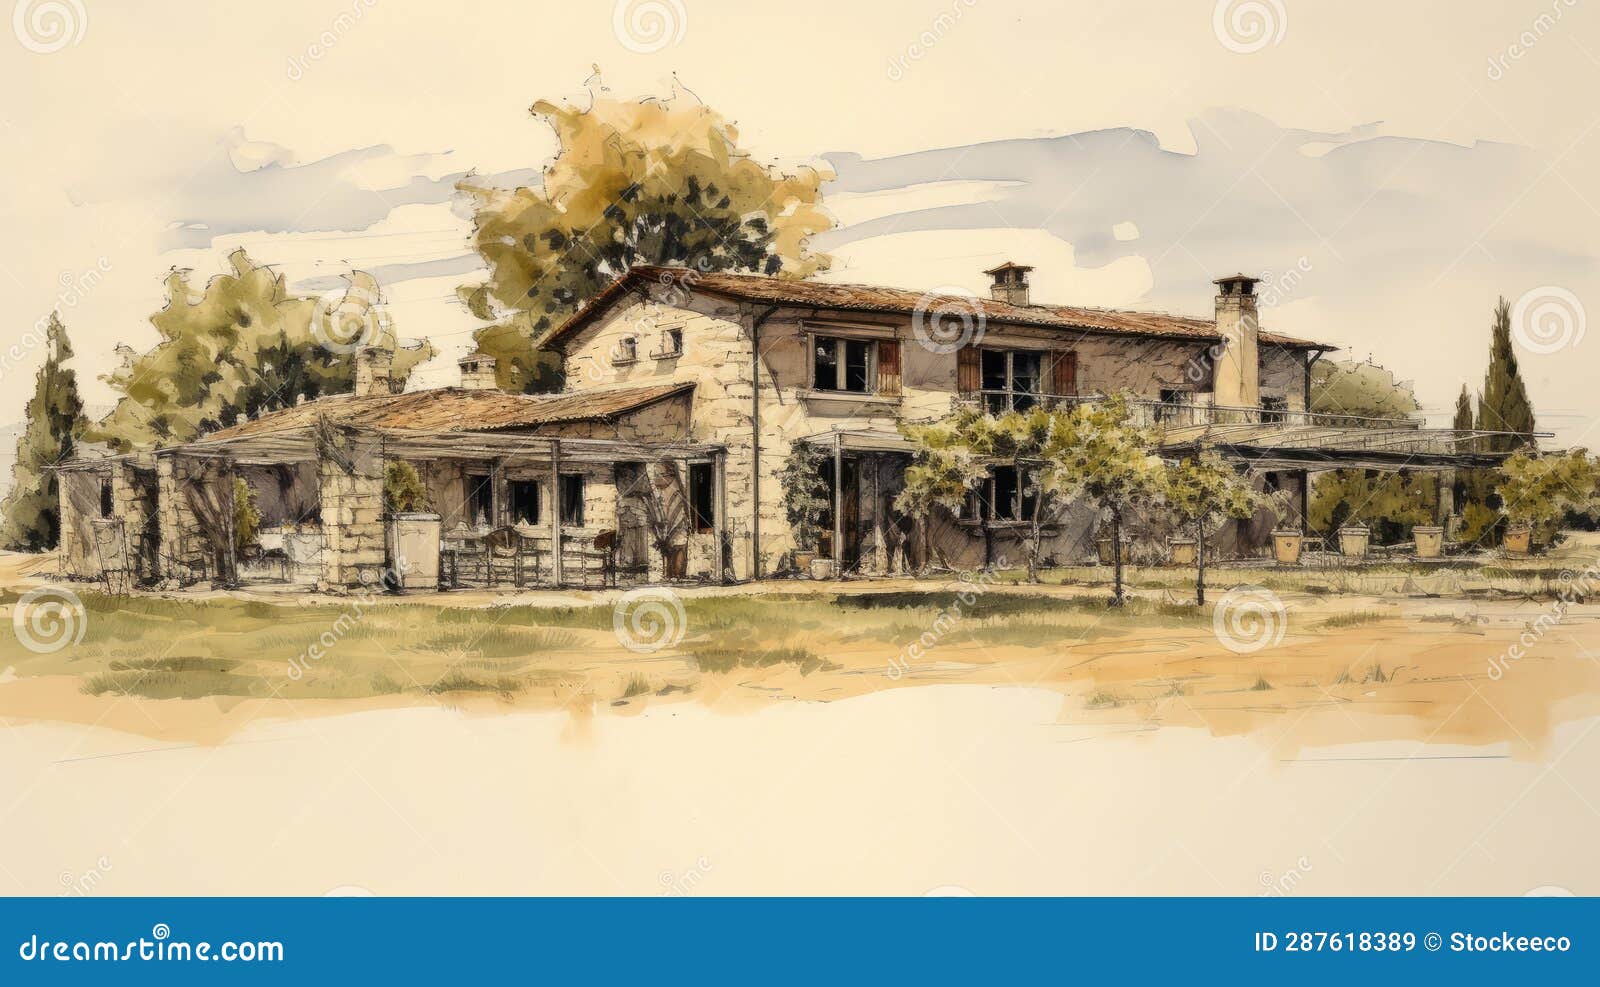 watercolor drawing of a rural residence in italy